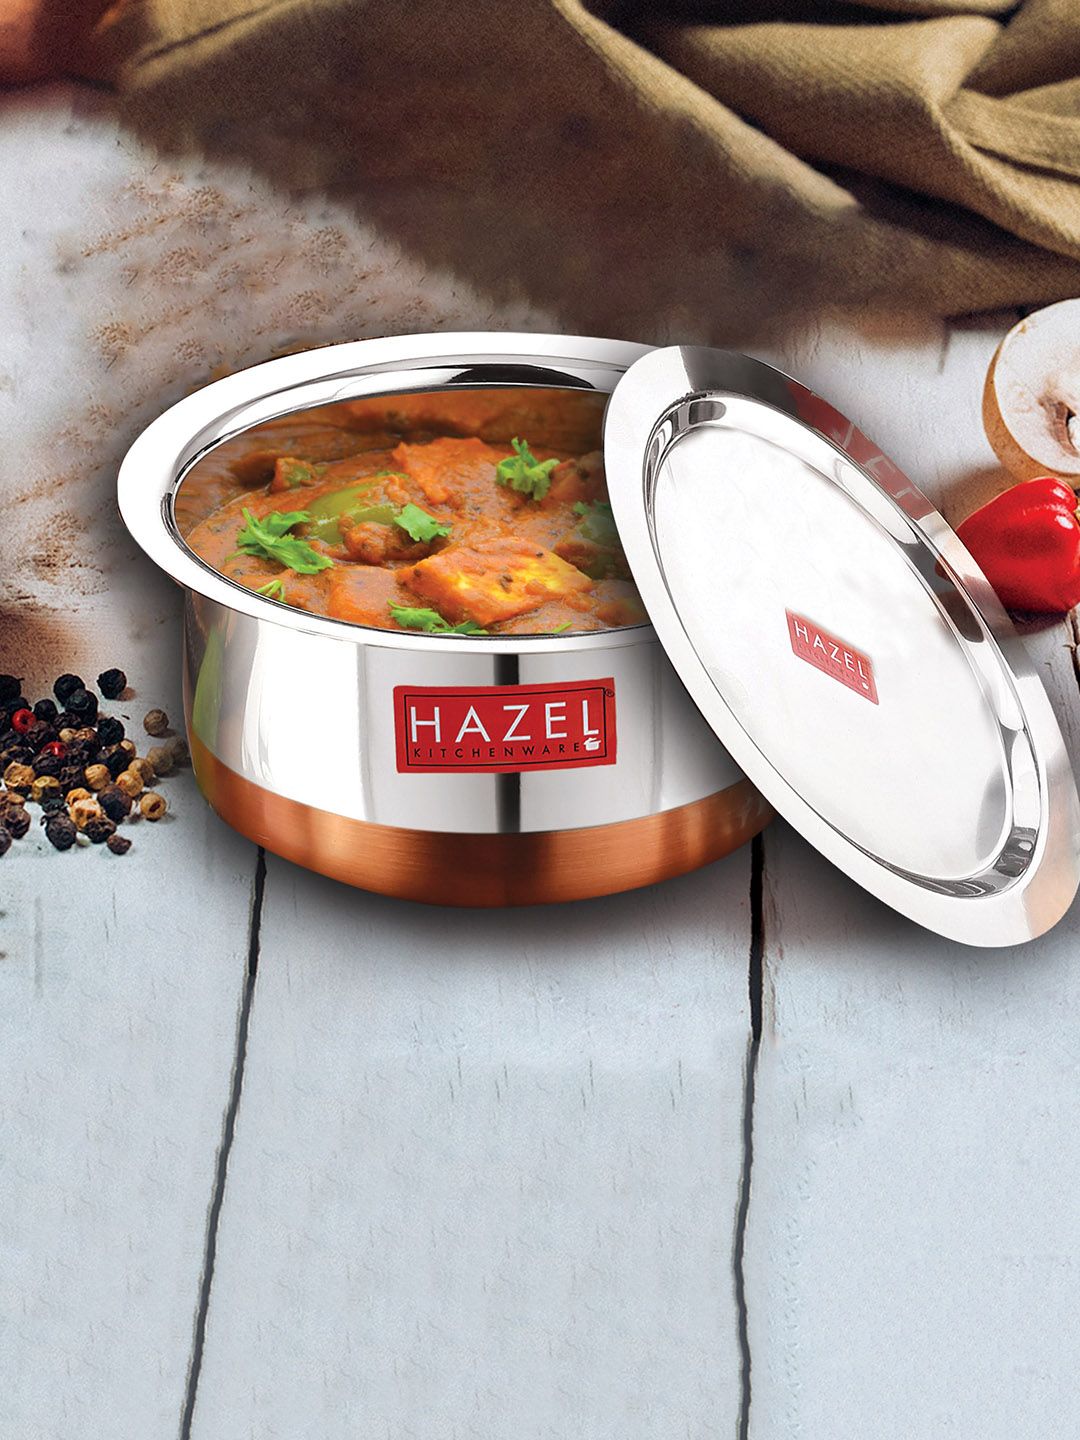 HAZEL Silver-Colored Solid Copper Bottom Stainless Steel Handi With Lid Price in India